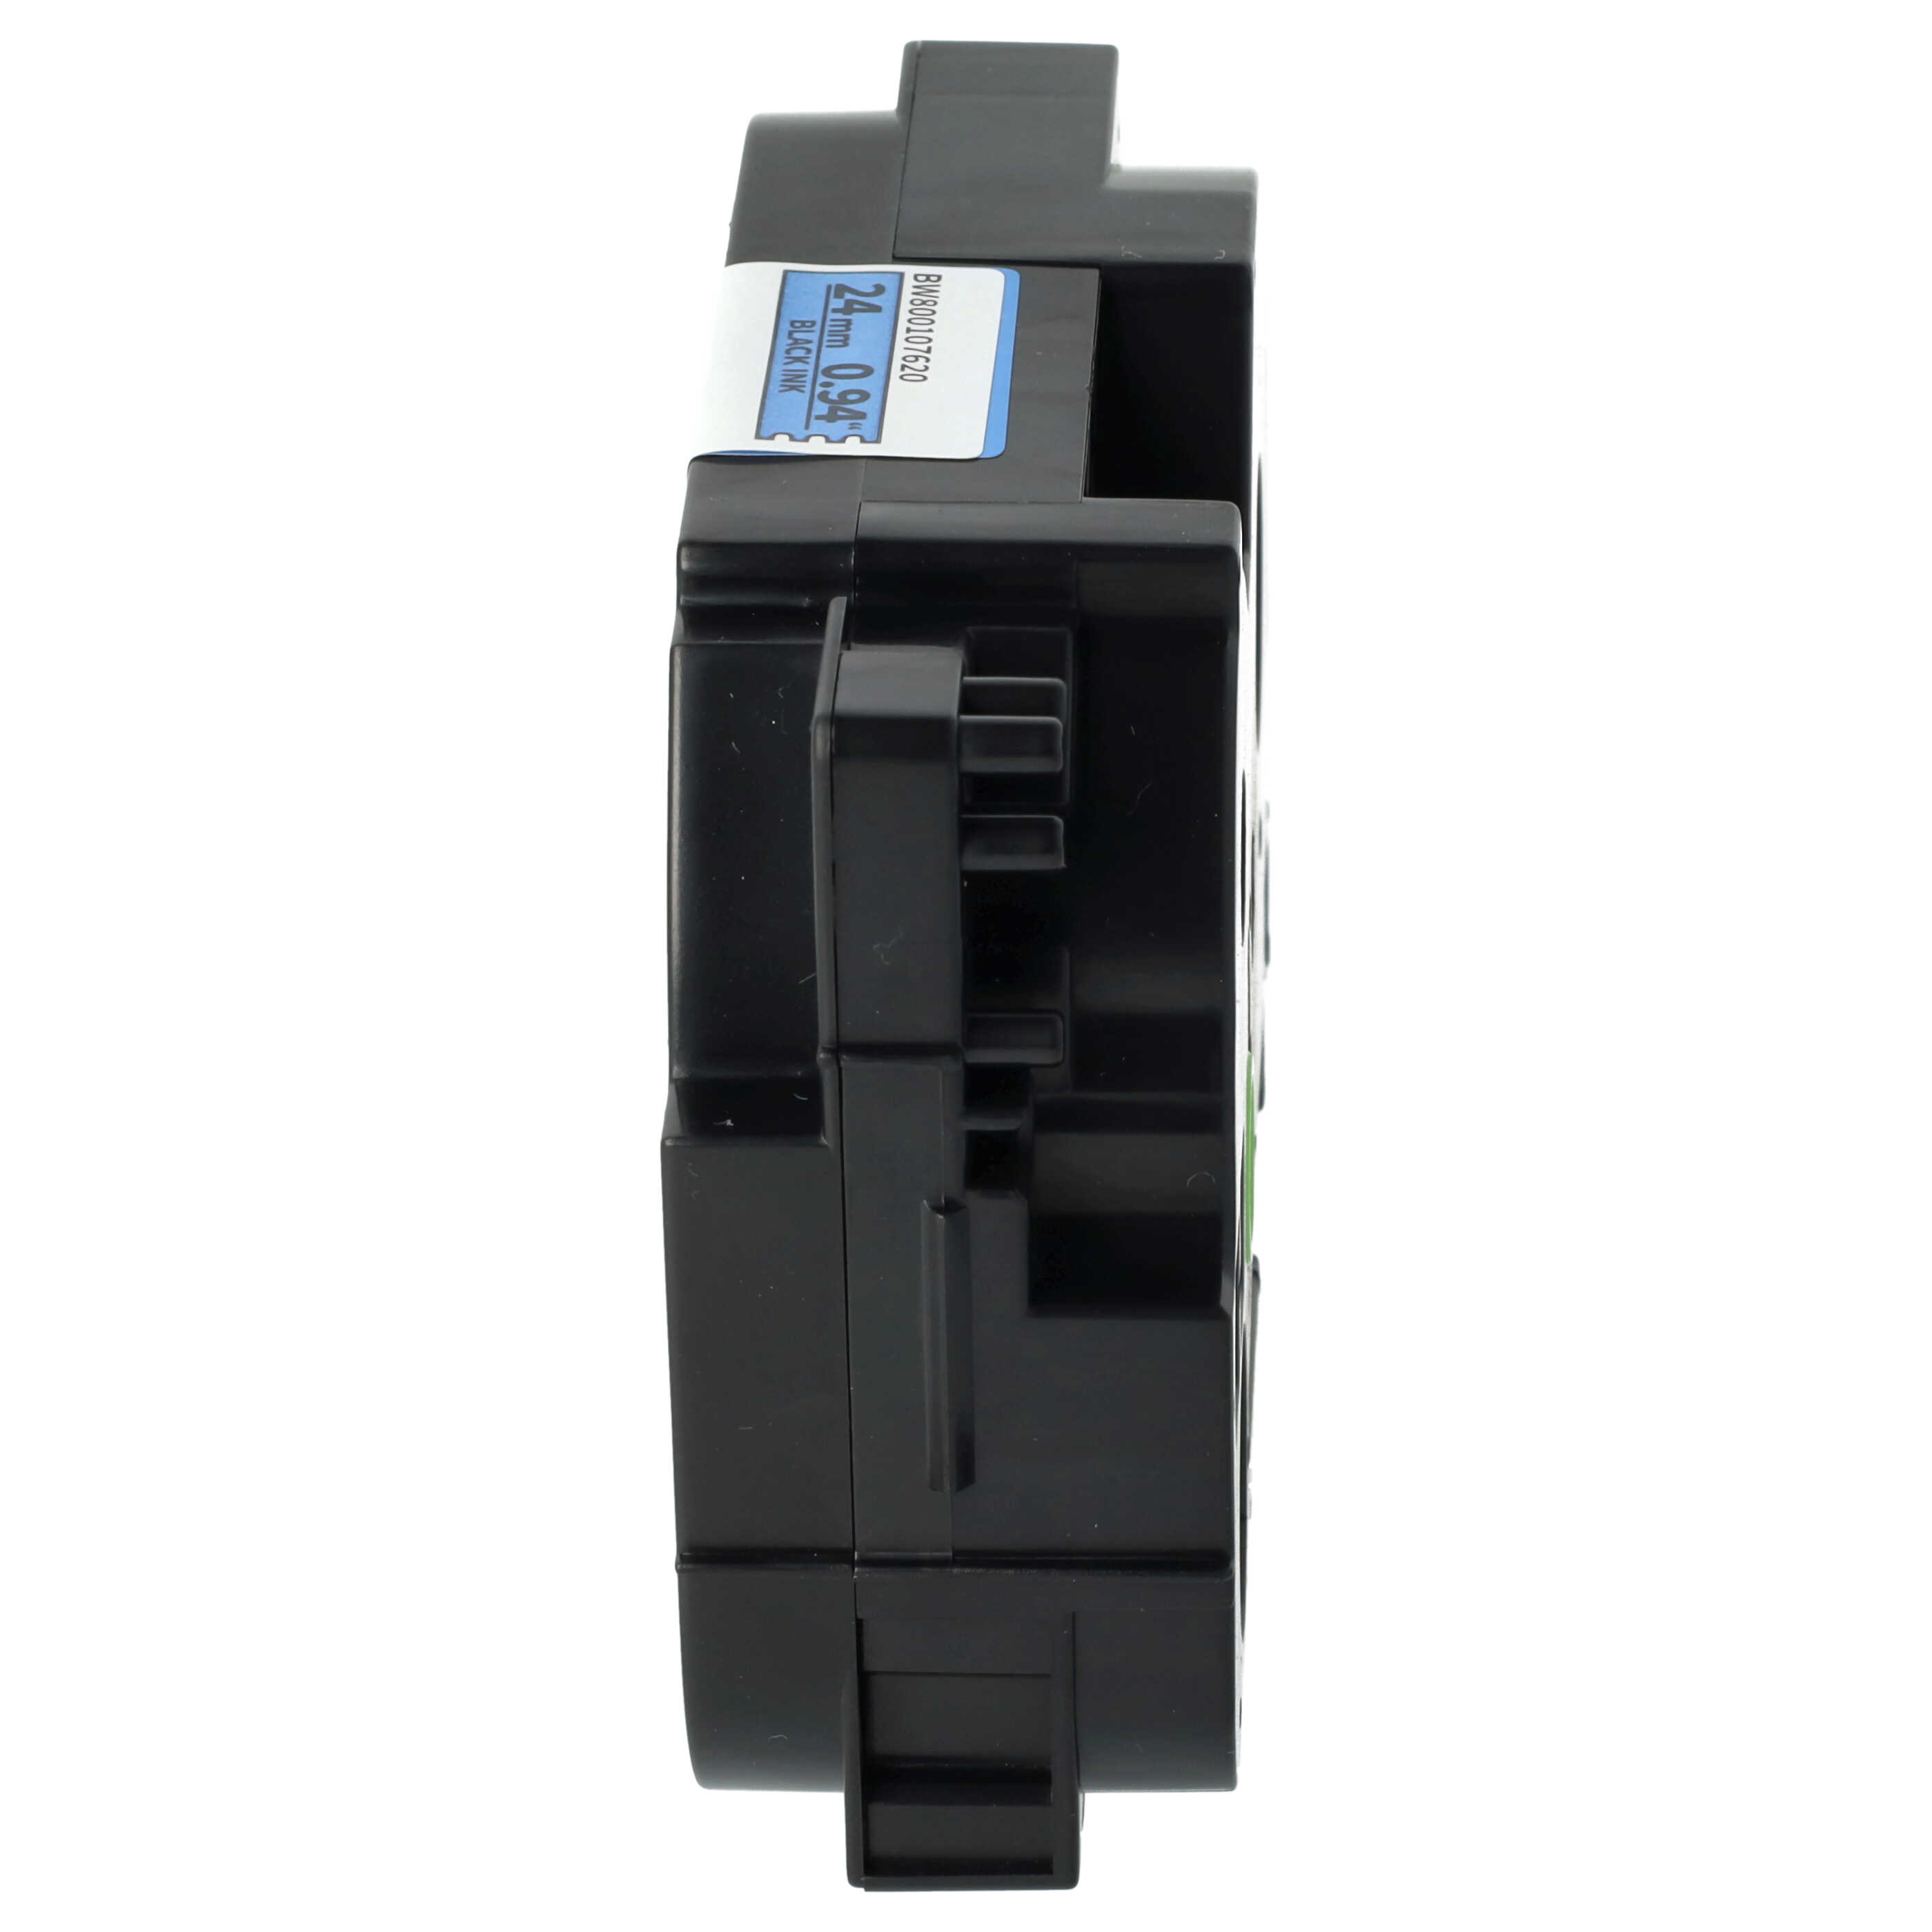 Label Tape as Replacement for Brother TZE-551, TZ-551 - 24 mm Black to Blue